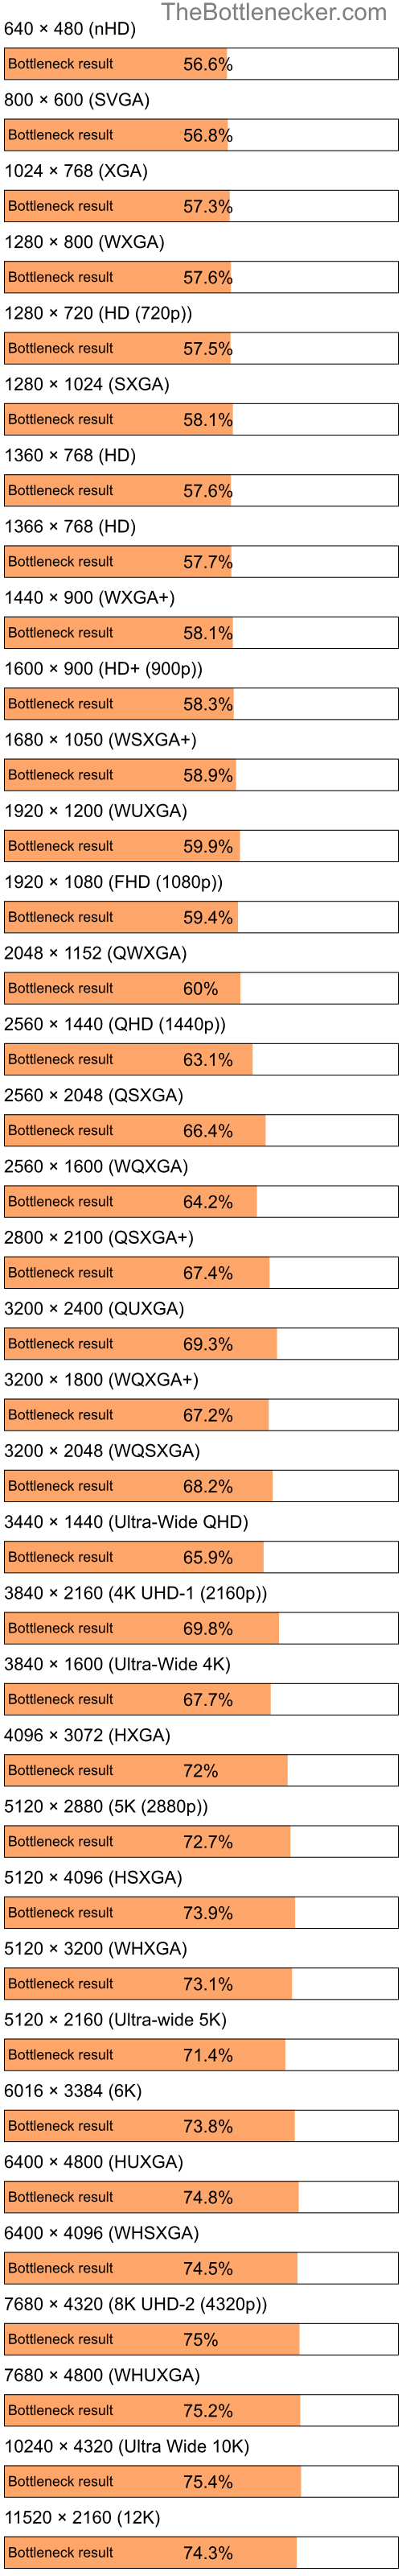 Bottleneck results by resolution for Intel Celeron M and AMD Mobility Radeon 4100 in Processor Intense Tasks